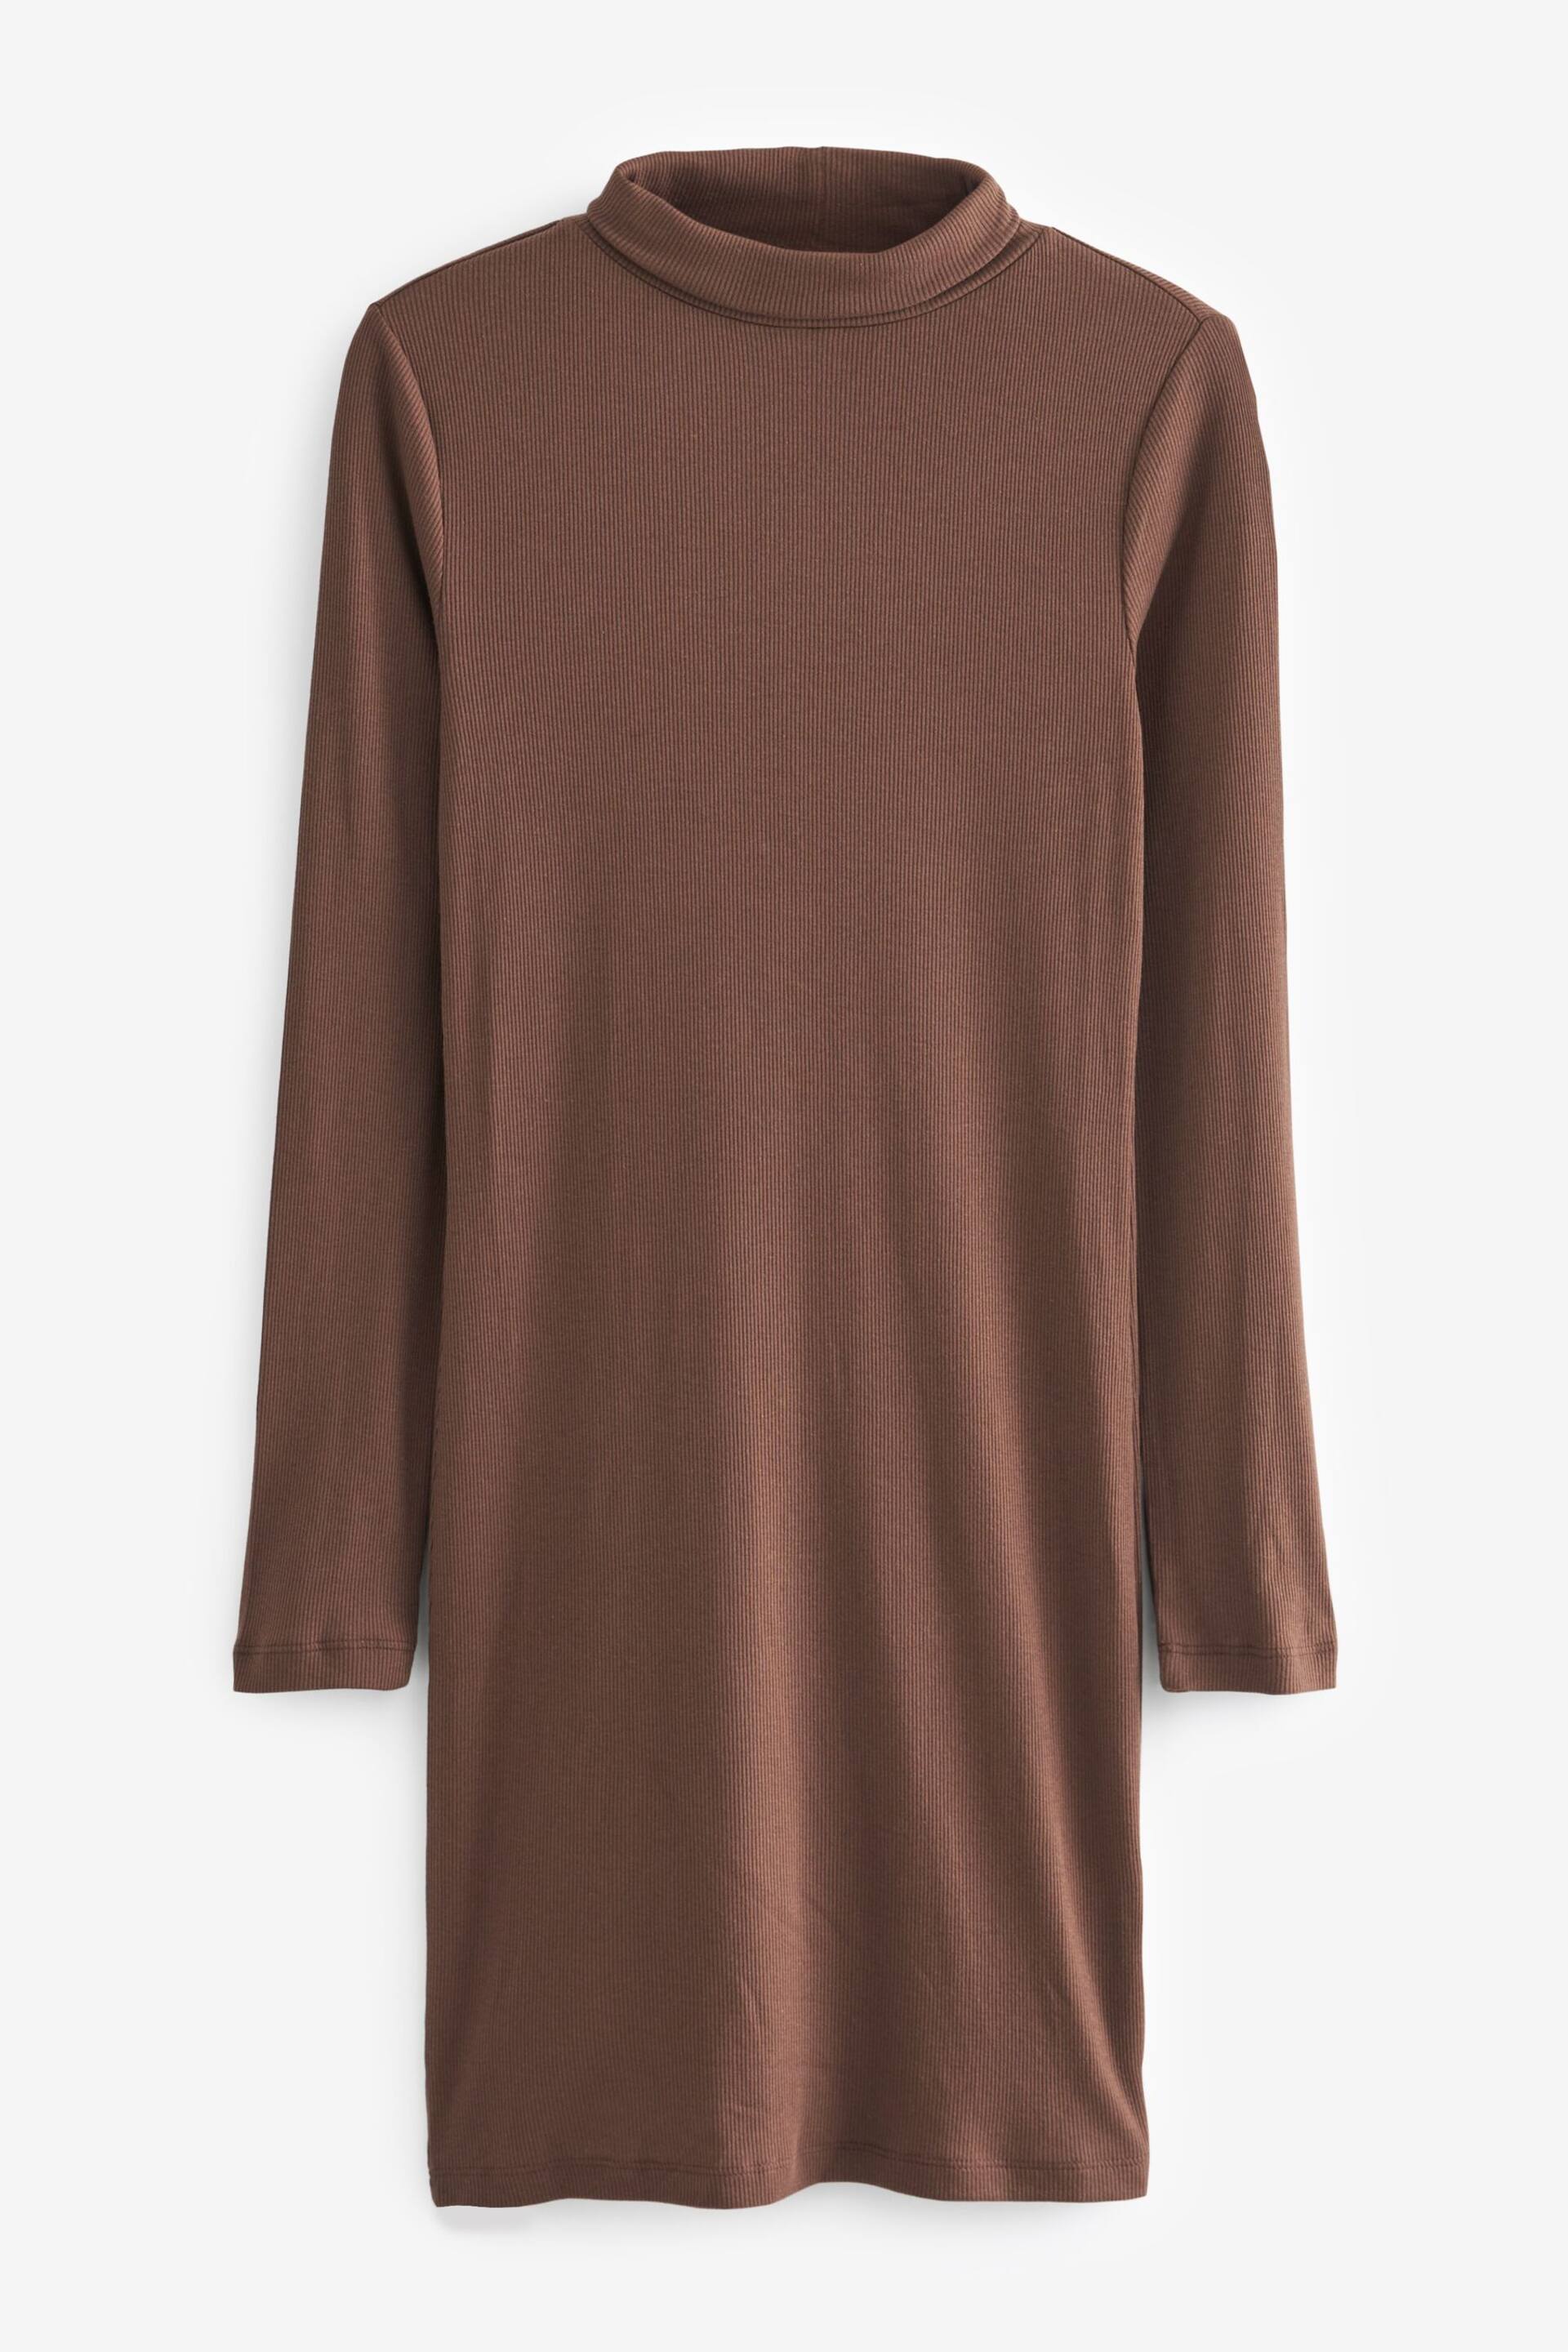 Chocolate Brown Ribbed Roll Neck Long Sleeve Mini Dress - Image 5 of 6